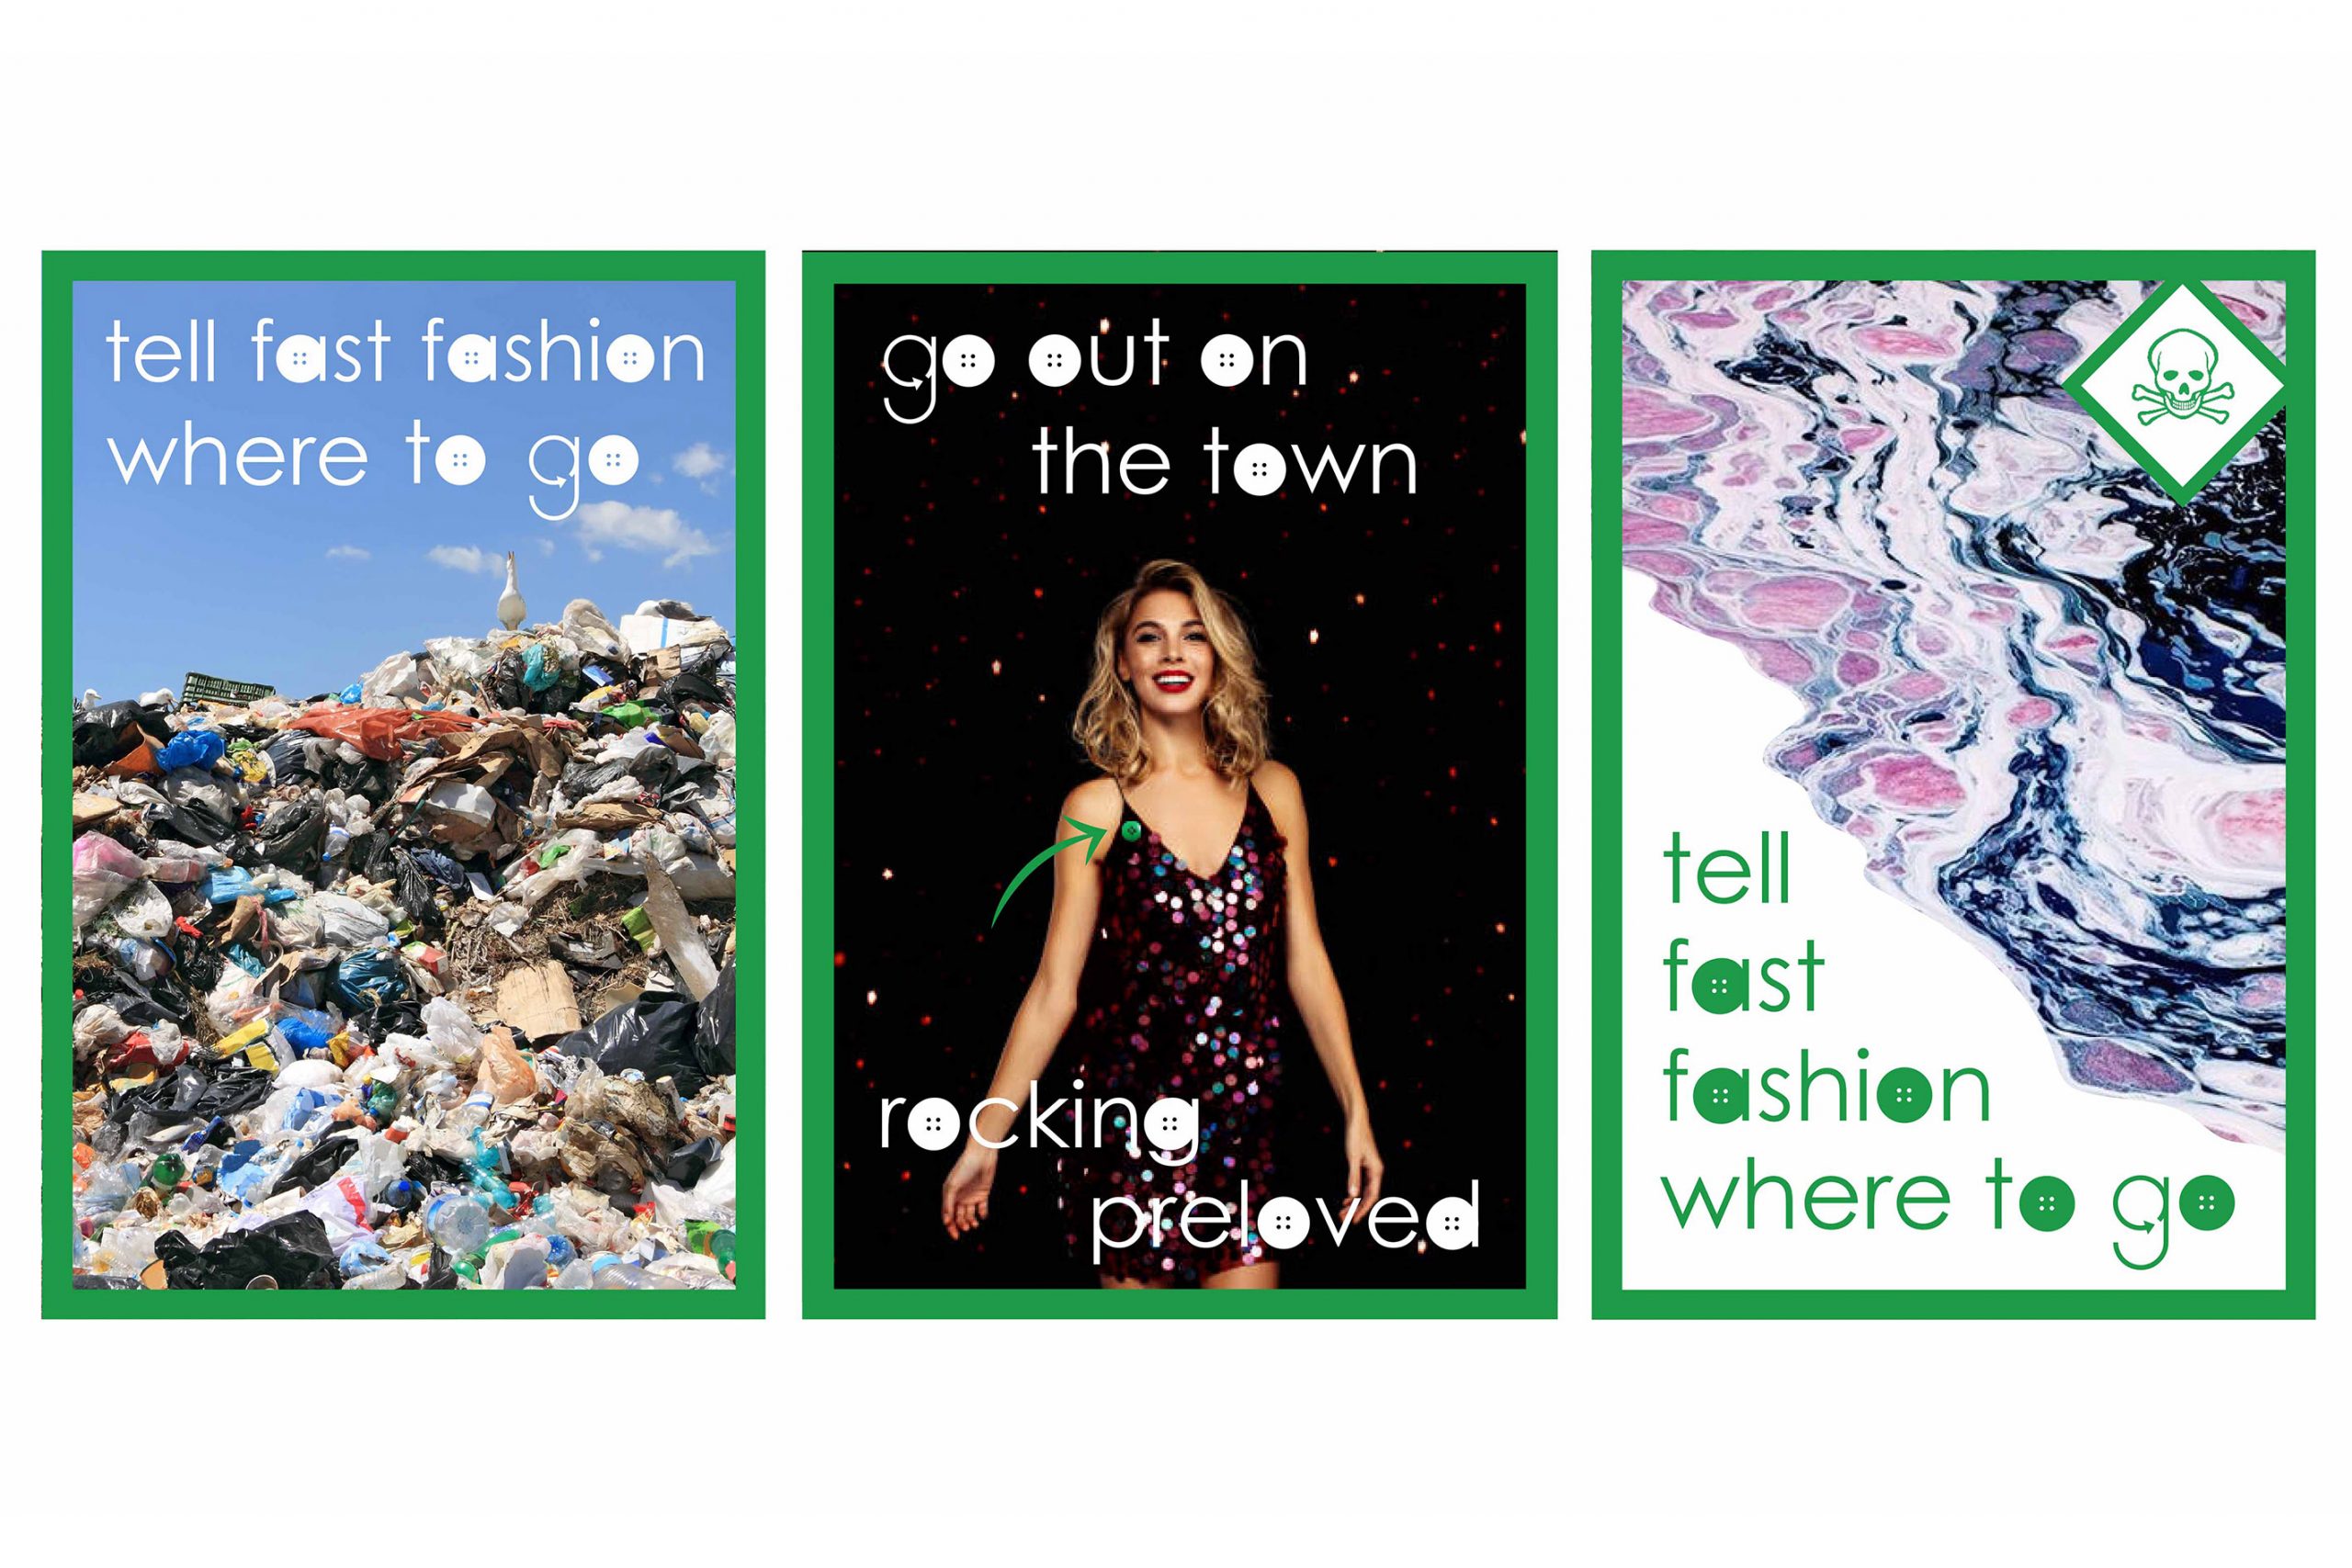 Campaign posters about the negative effects of fast fashion